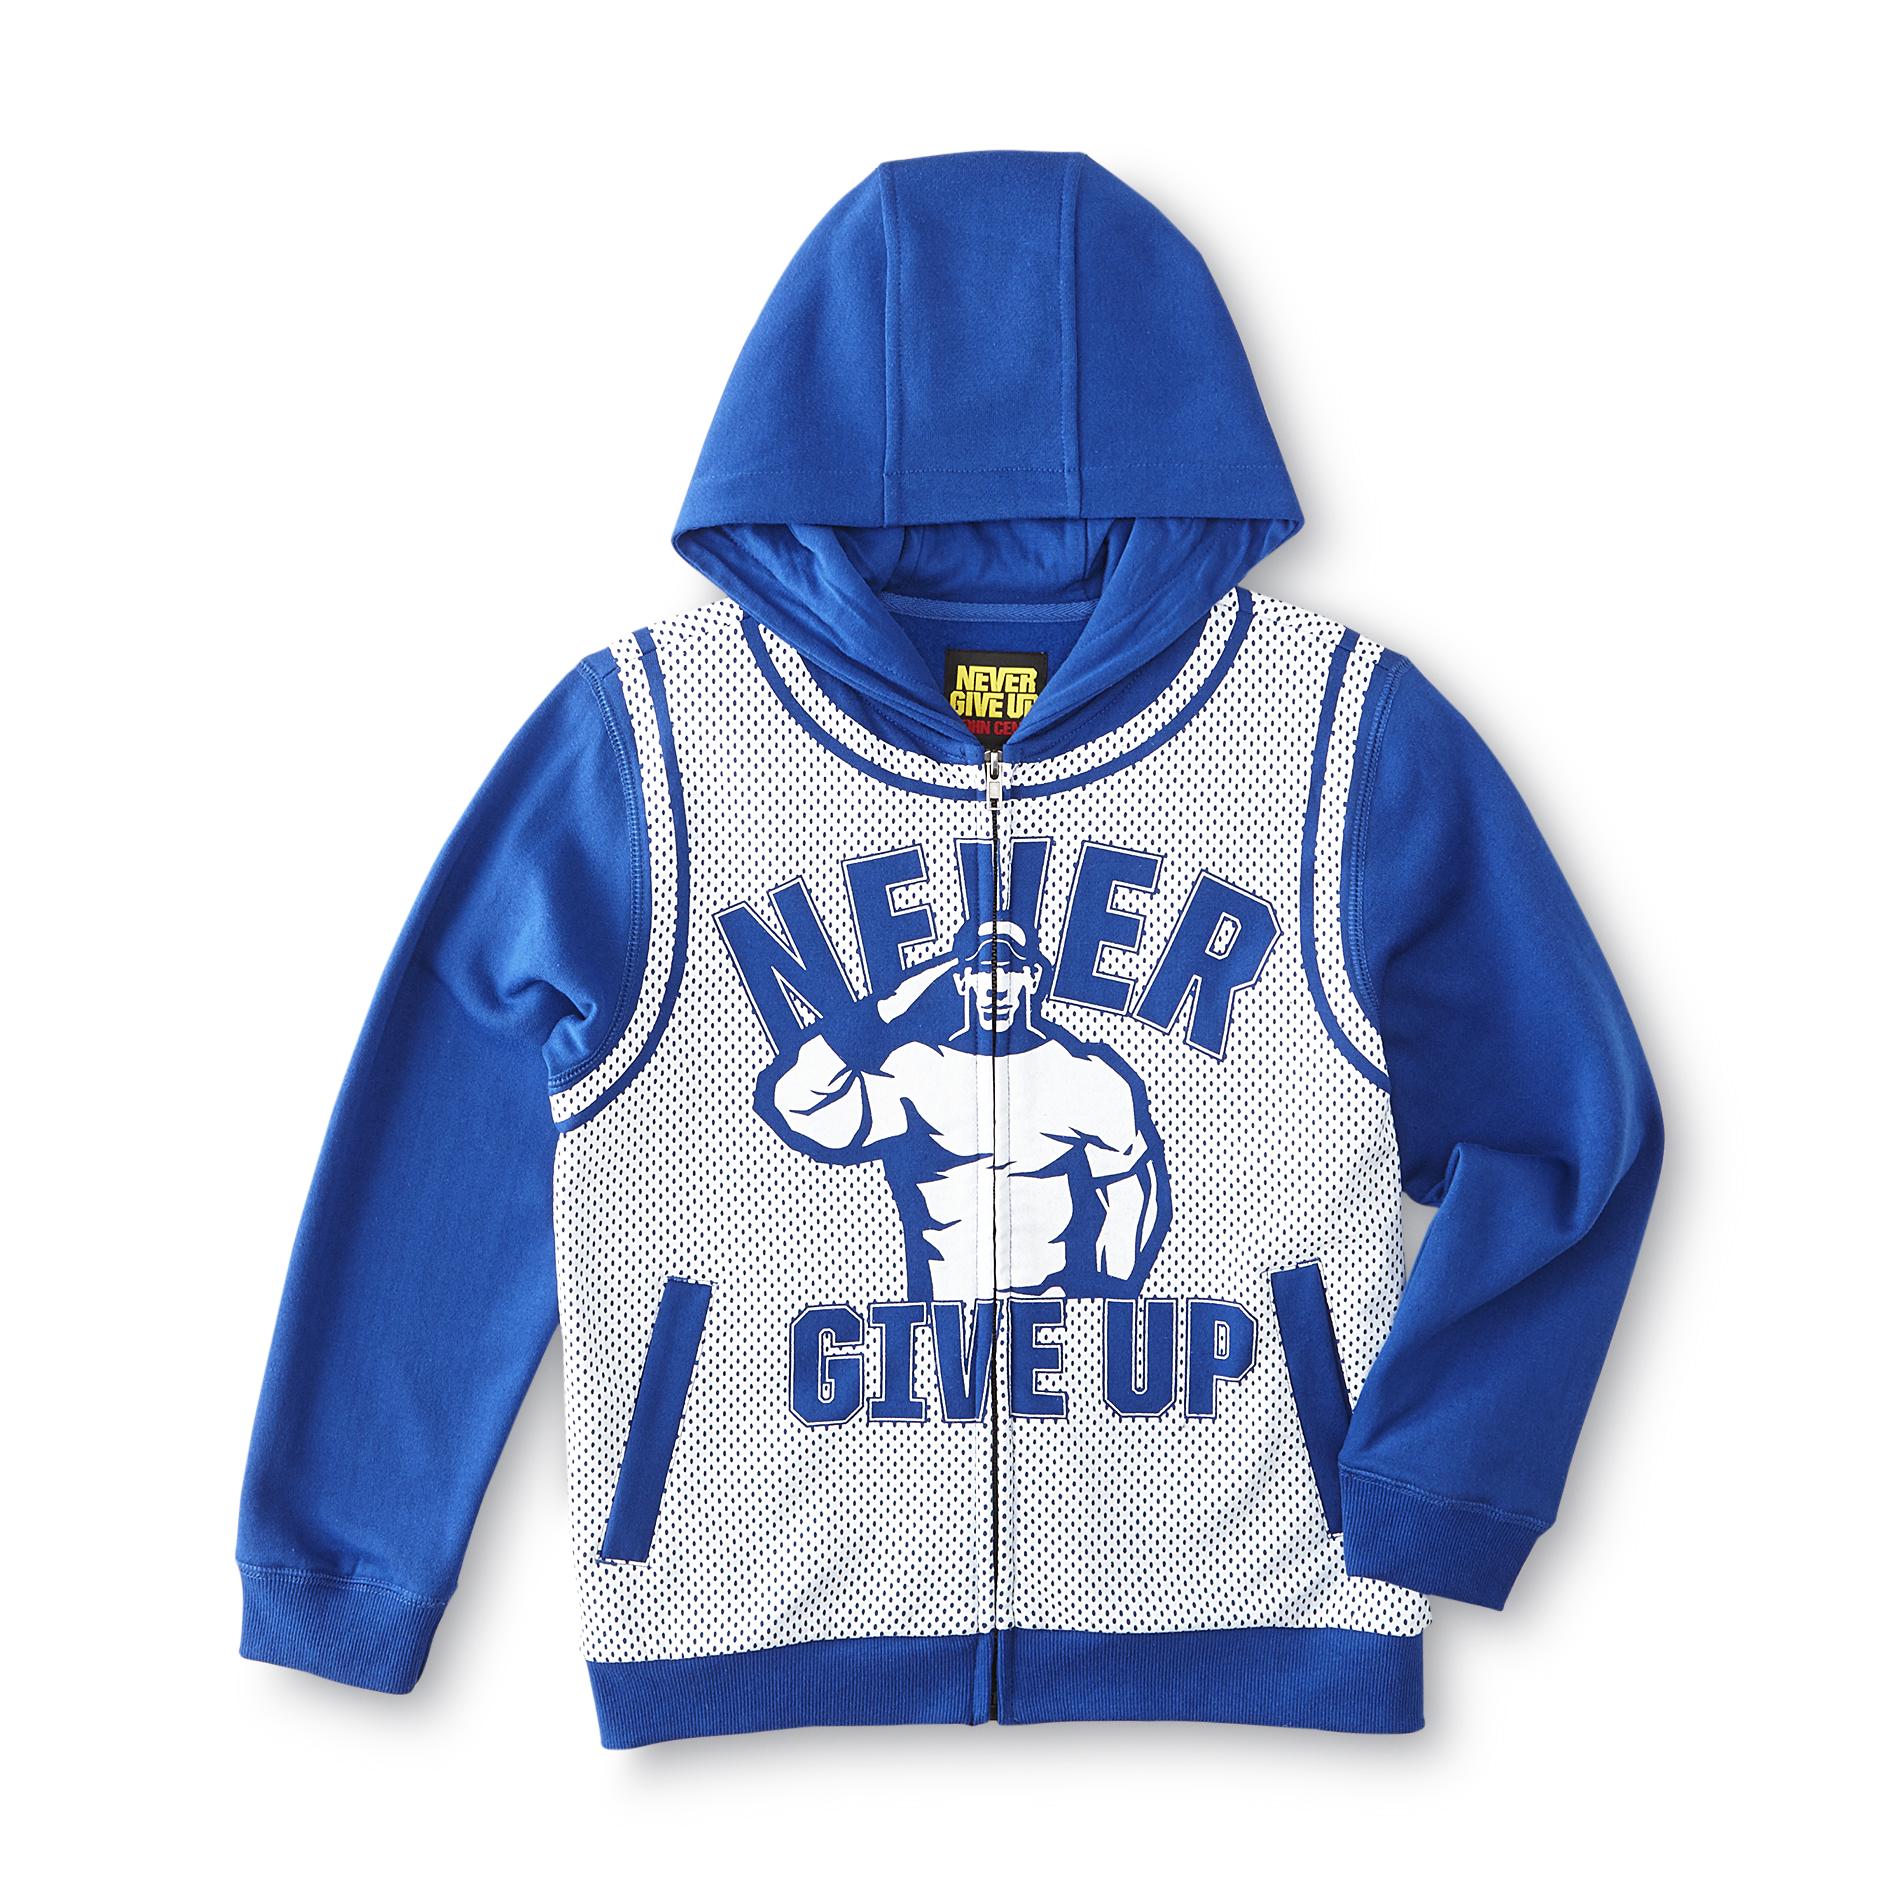 Never Give Up By John Cena Boy's Graphic Hoodie Jacket - Never Give Up